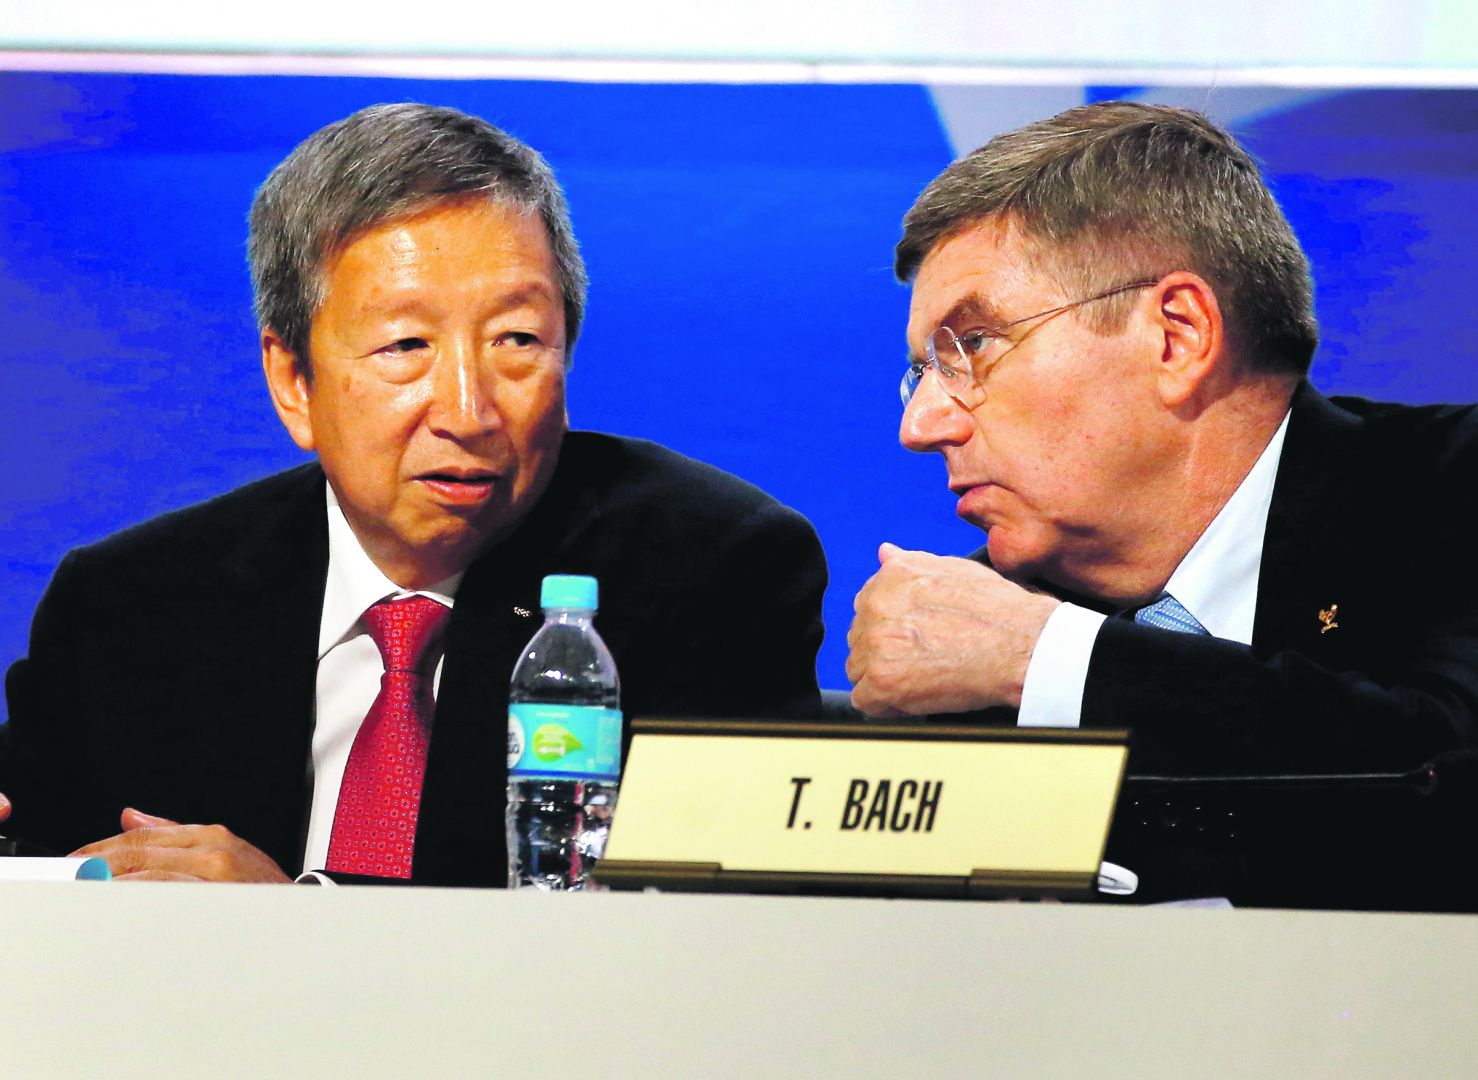 Thomas Bach has appointed Ser Miang Ng (left), another defeated Presidential candidate, to head the next meeting of the IOC Finance Commission after Richard Carrión's decision to quit